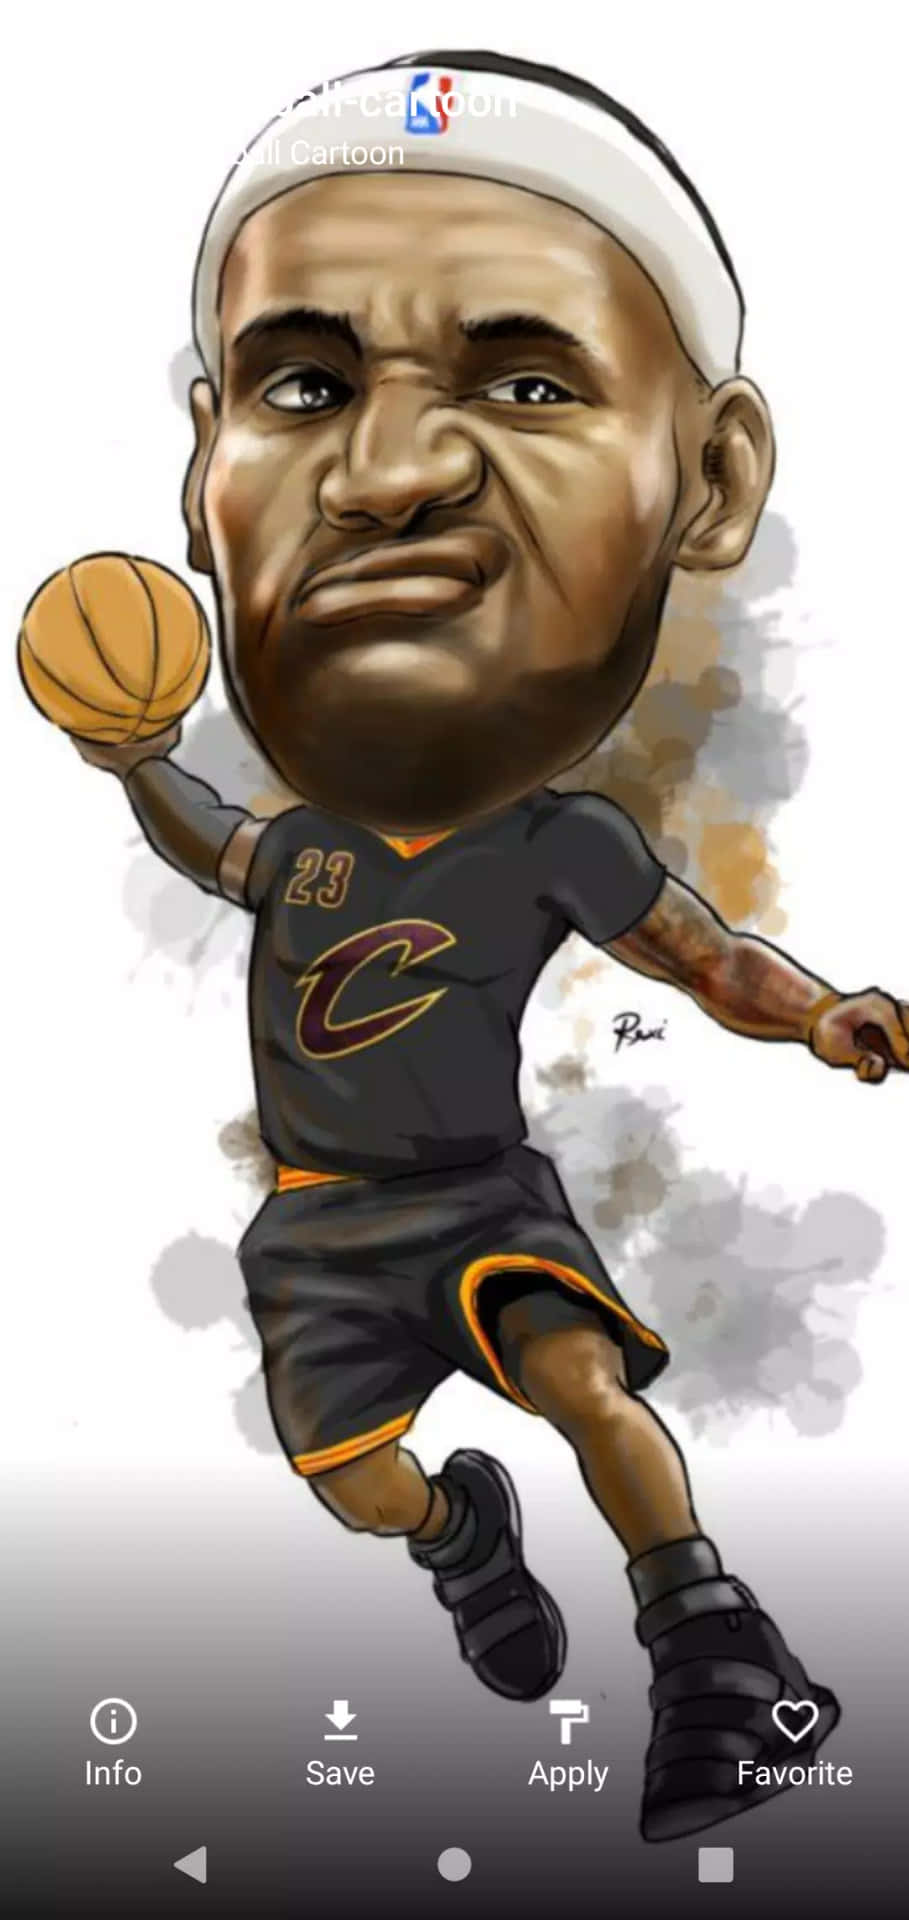 These cartoon NBA players have lots of energy! Wallpaper